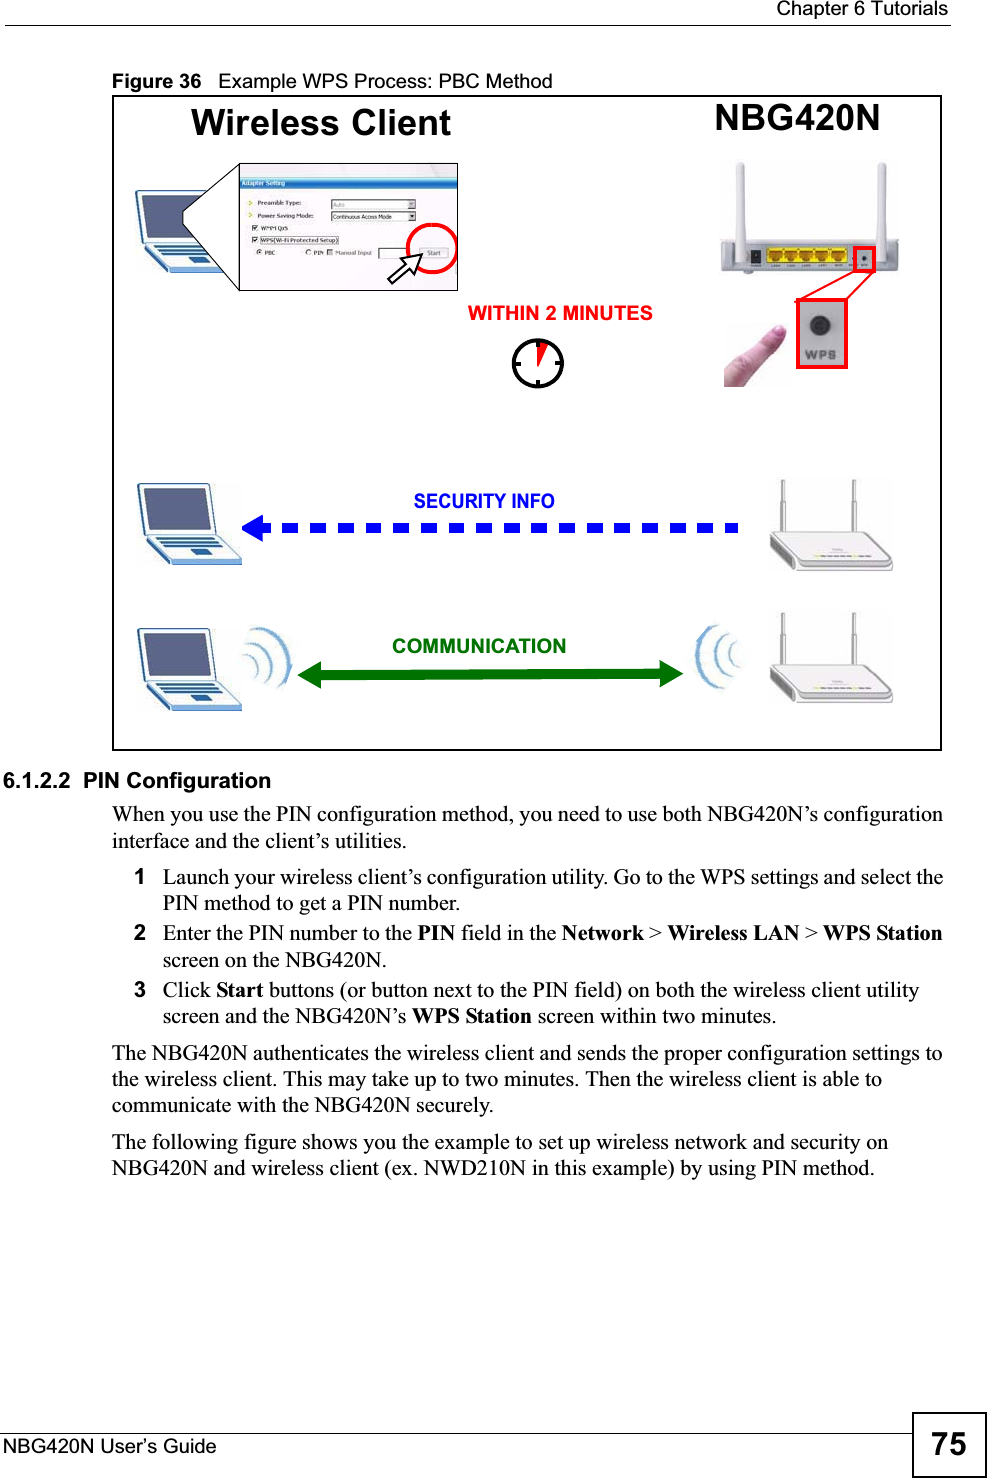  Chapter 6 TutorialsNBG420N User’s Guide 75Figure 36   Example WPS Process: PBC Method6.1.2.2  PIN ConfigurationWhen you use the PIN configuration method, you need to use both NBG420N’s configuration interface and the client’s utilities.1Launch your wireless client’s configuration utility. Go to the WPS settings and select the PIN method to get a PIN number.2Enter the PIN number to the PIN field in the Network &gt; Wireless LAN &gt;WPS Stationscreen on the NBG420N.3Click Start buttons (or button next to the PIN field) on both the wireless client utility screen and the NBG420N’s WPS Station screen within two minutes.The NBG420N authenticates the wireless client and sends the proper configuration settings to the wireless client. This may take up to two minutes. Then the wireless client is able to communicate with the NBG420N securely. The following figure shows you the example to set up wireless network and security on NBG420N and wireless client (ex. NWD210N in this example) by using PIN method. Wireless Client    NBG420NSECURITY INFOCOMMUNICATIONWITHIN 2 MINUTES